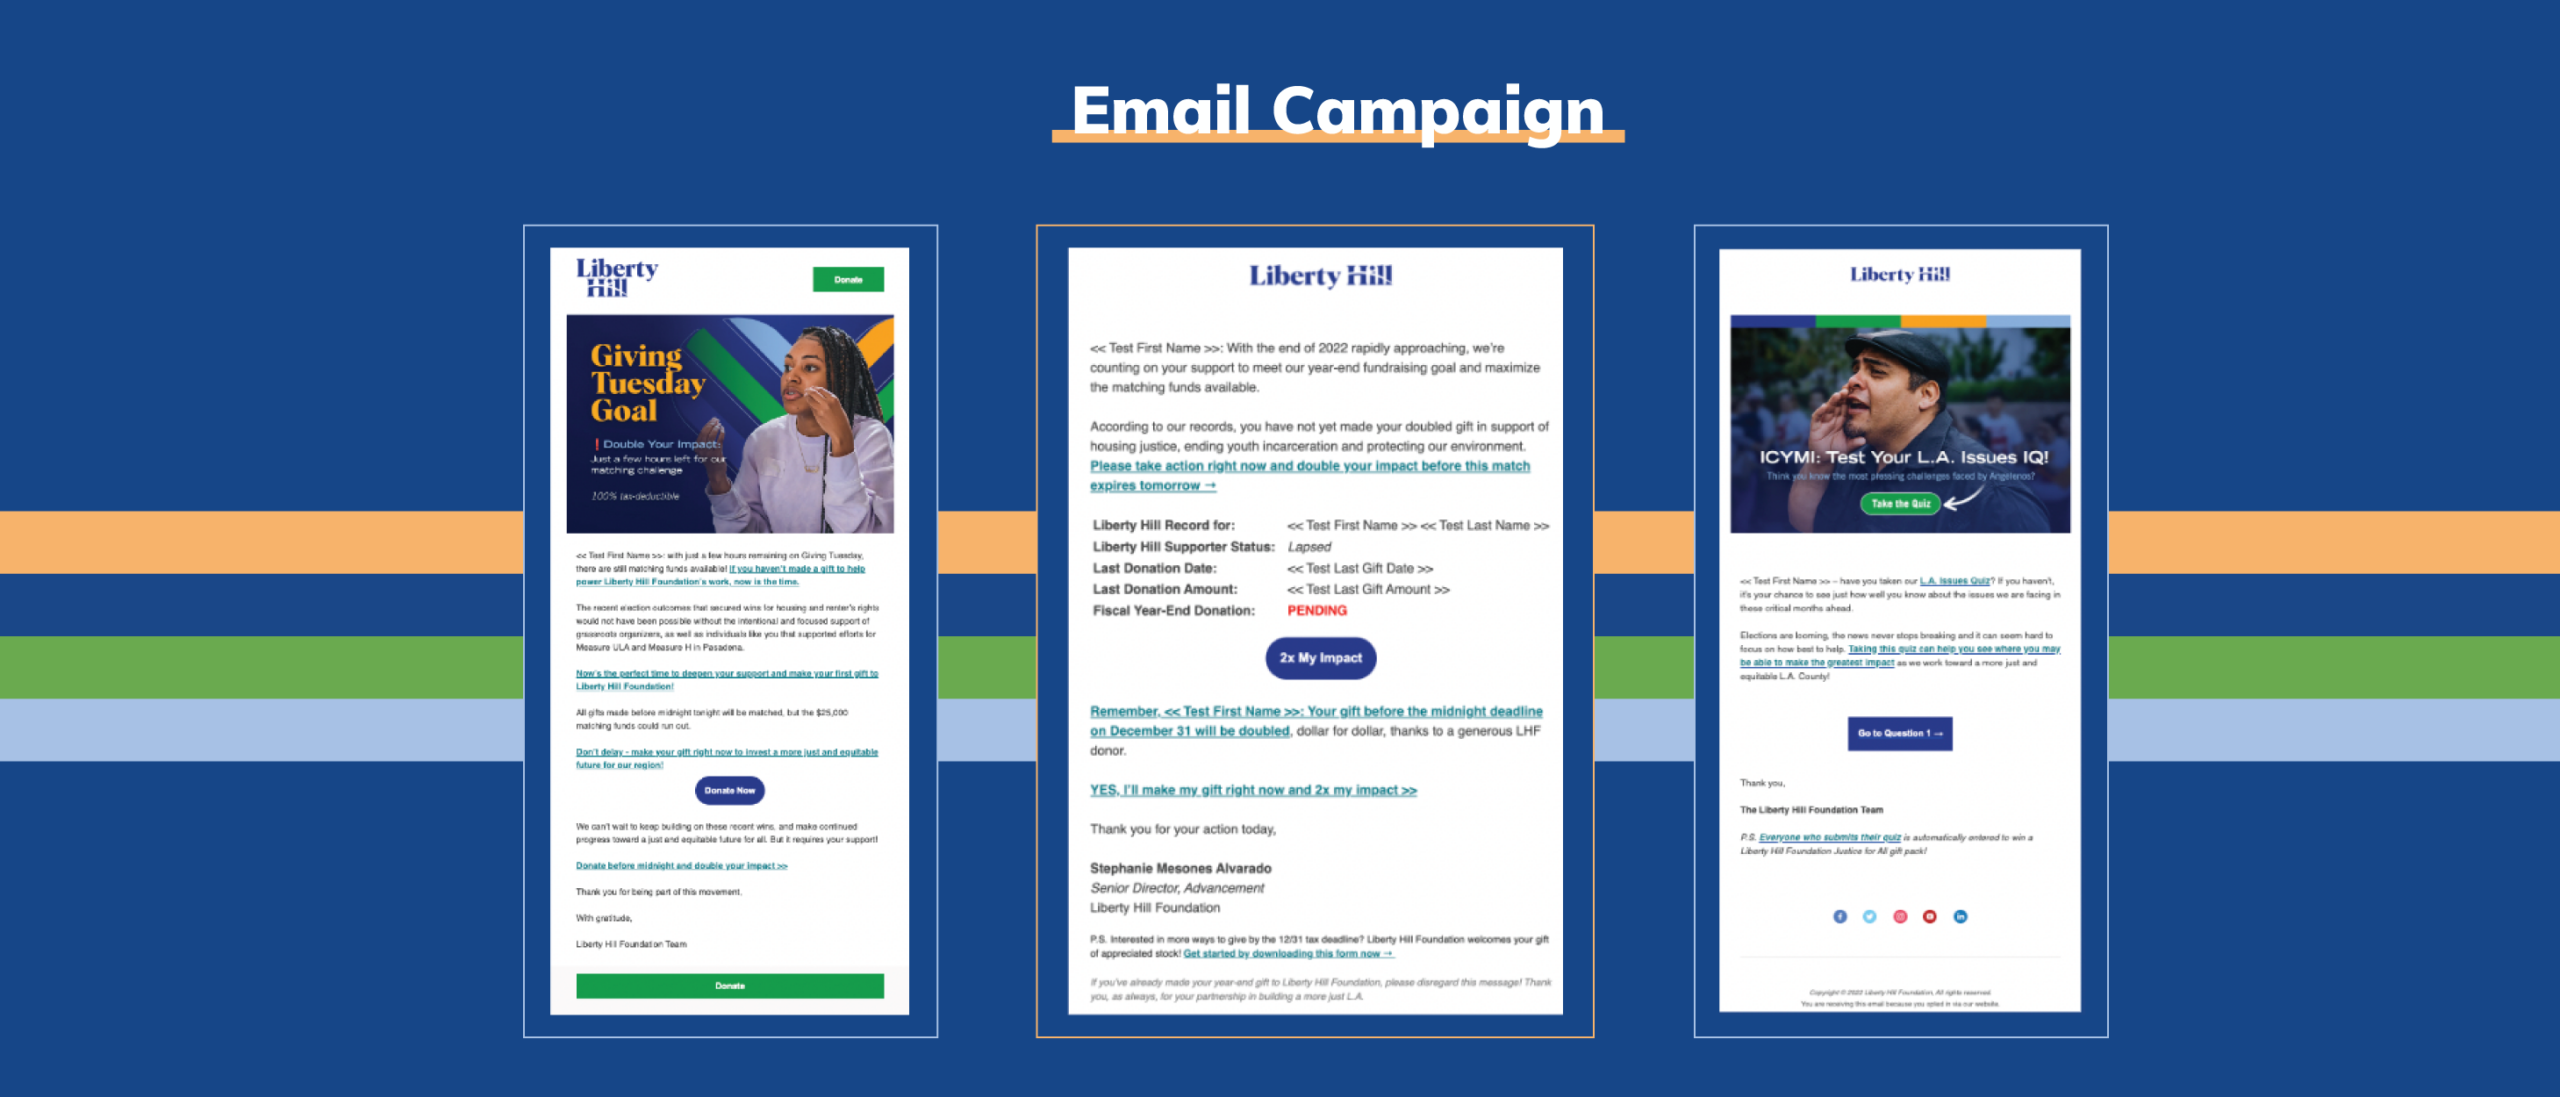 http://a%20screenshot%20of%20the%20email%20campaign.